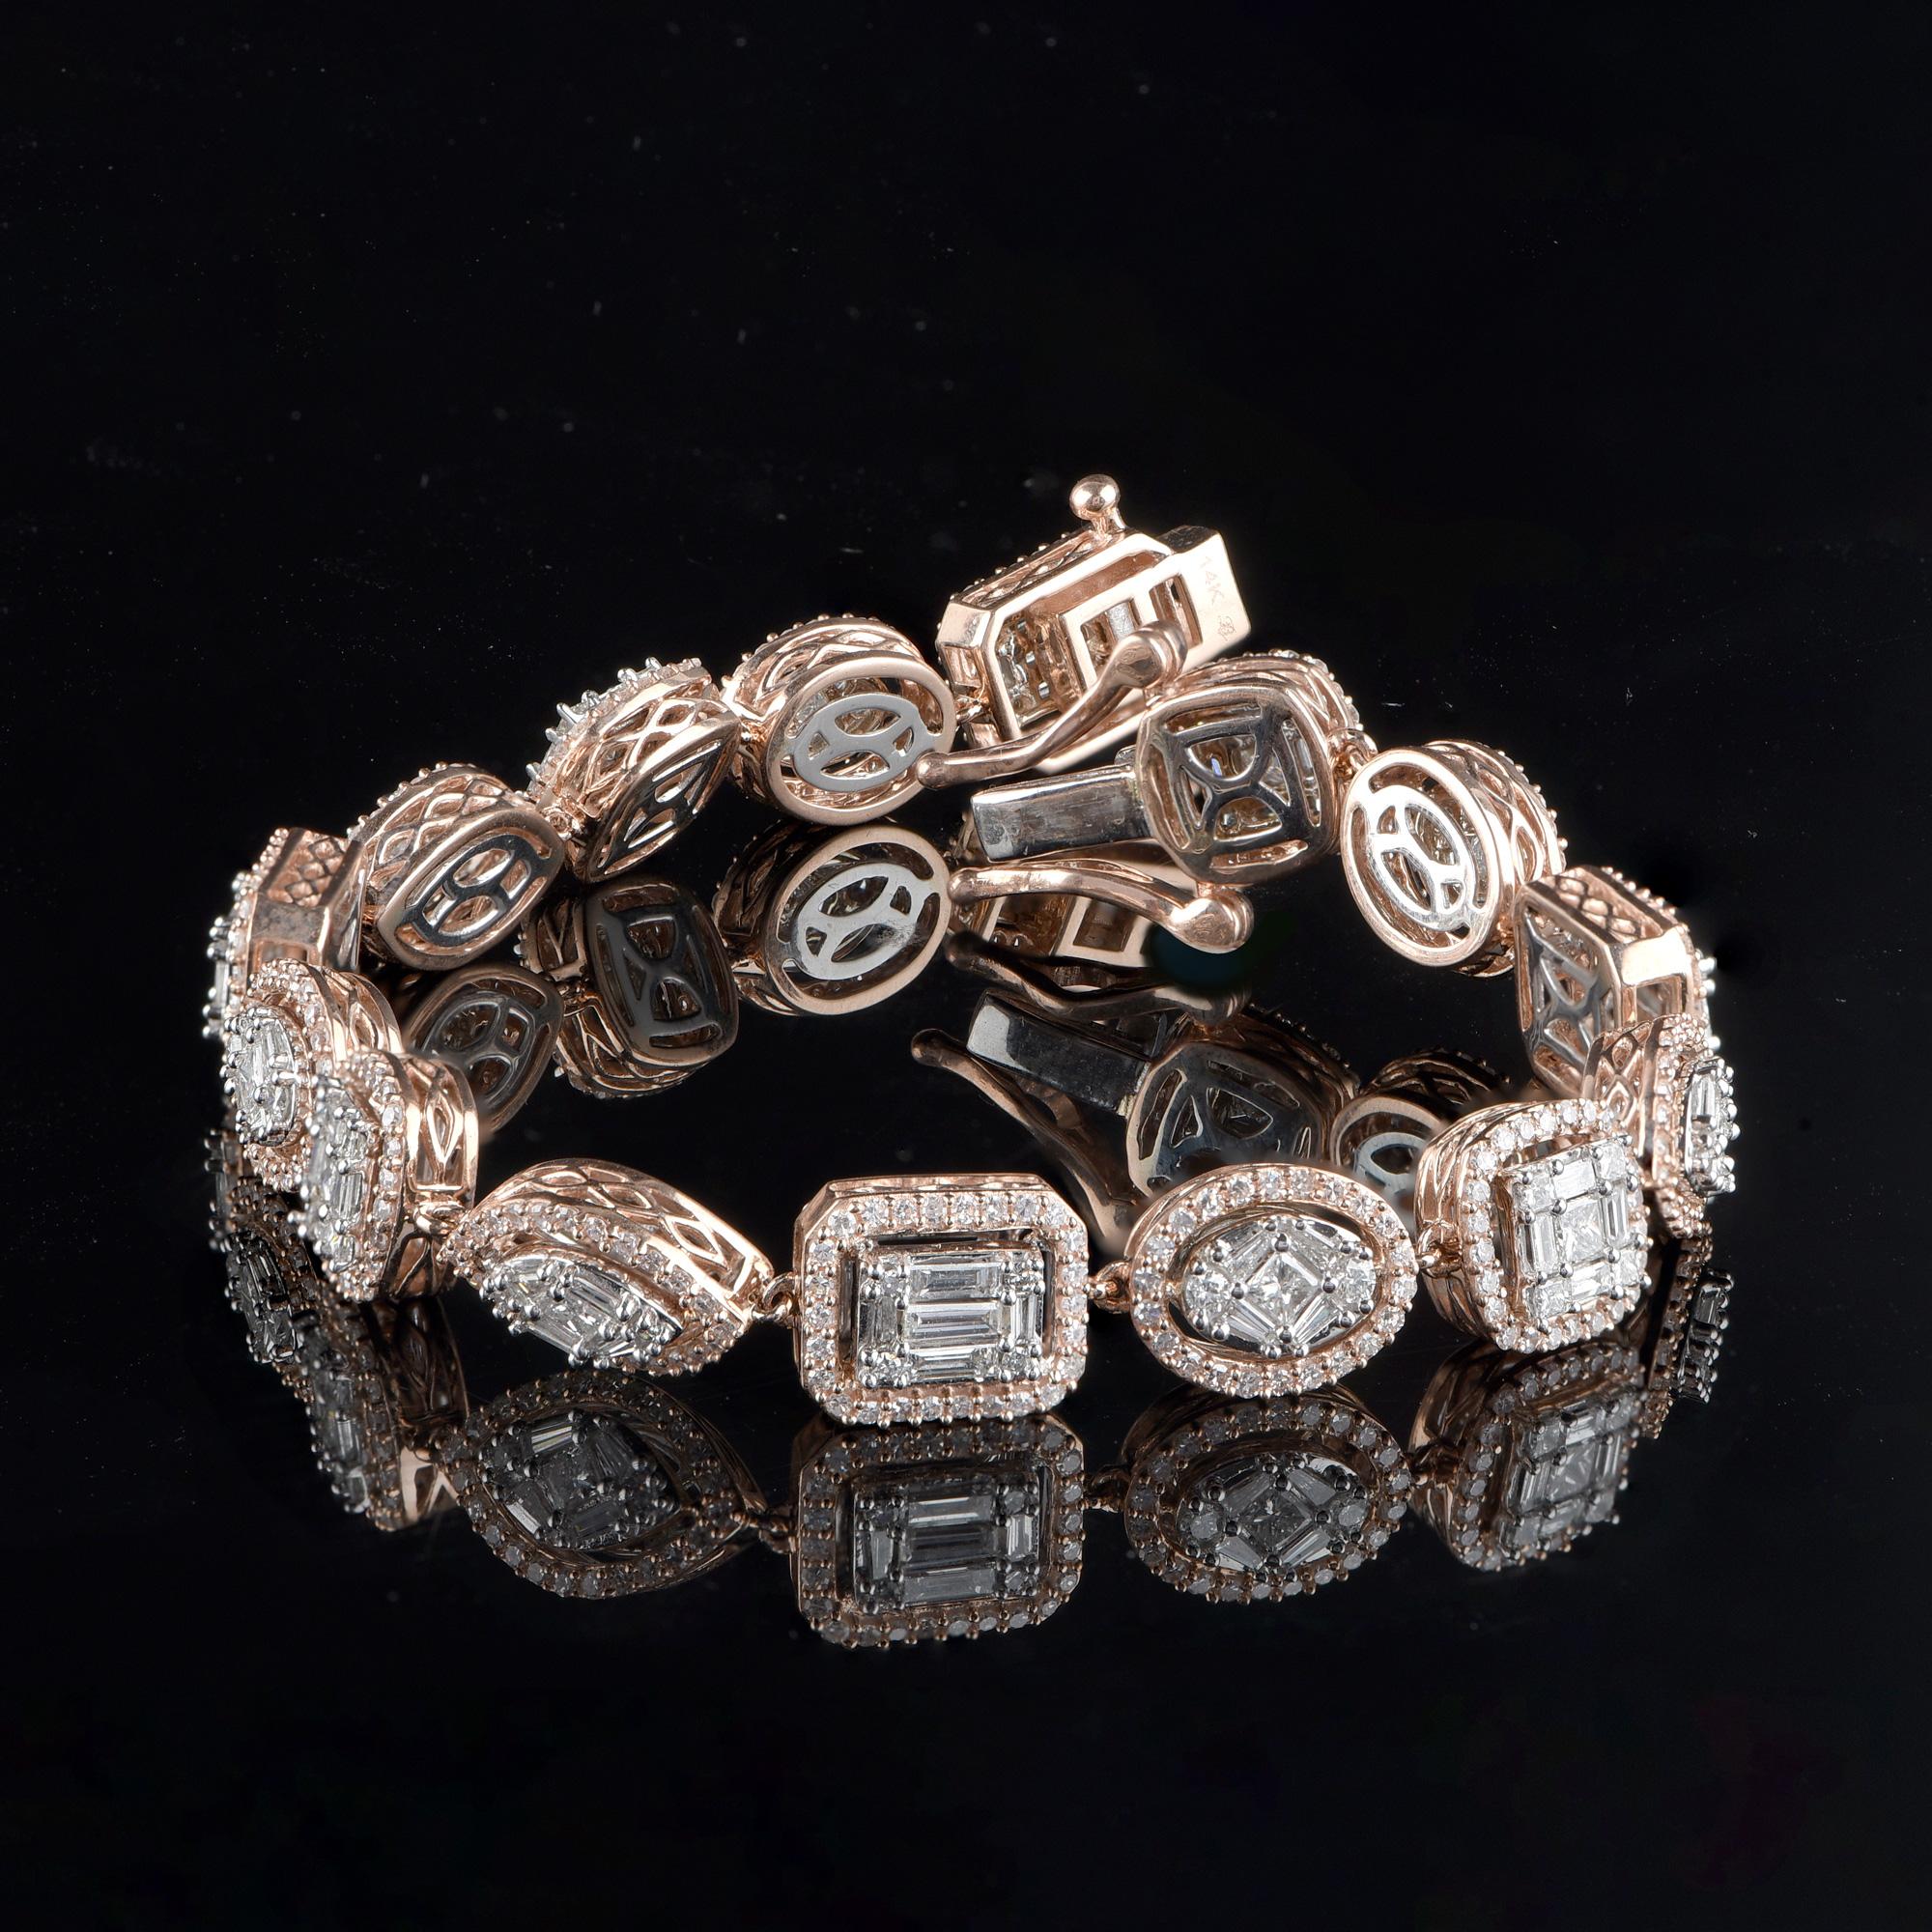 A beautiful fusion of diamonds and gold! This bracelet is studded with 27 princess, 64 baguette and 390 brilliant-cut diamonds elegantly set in prong setting and designed in 18 karat rose gold. The diamonds are graded H-I Color, I2 Clarity. 

This